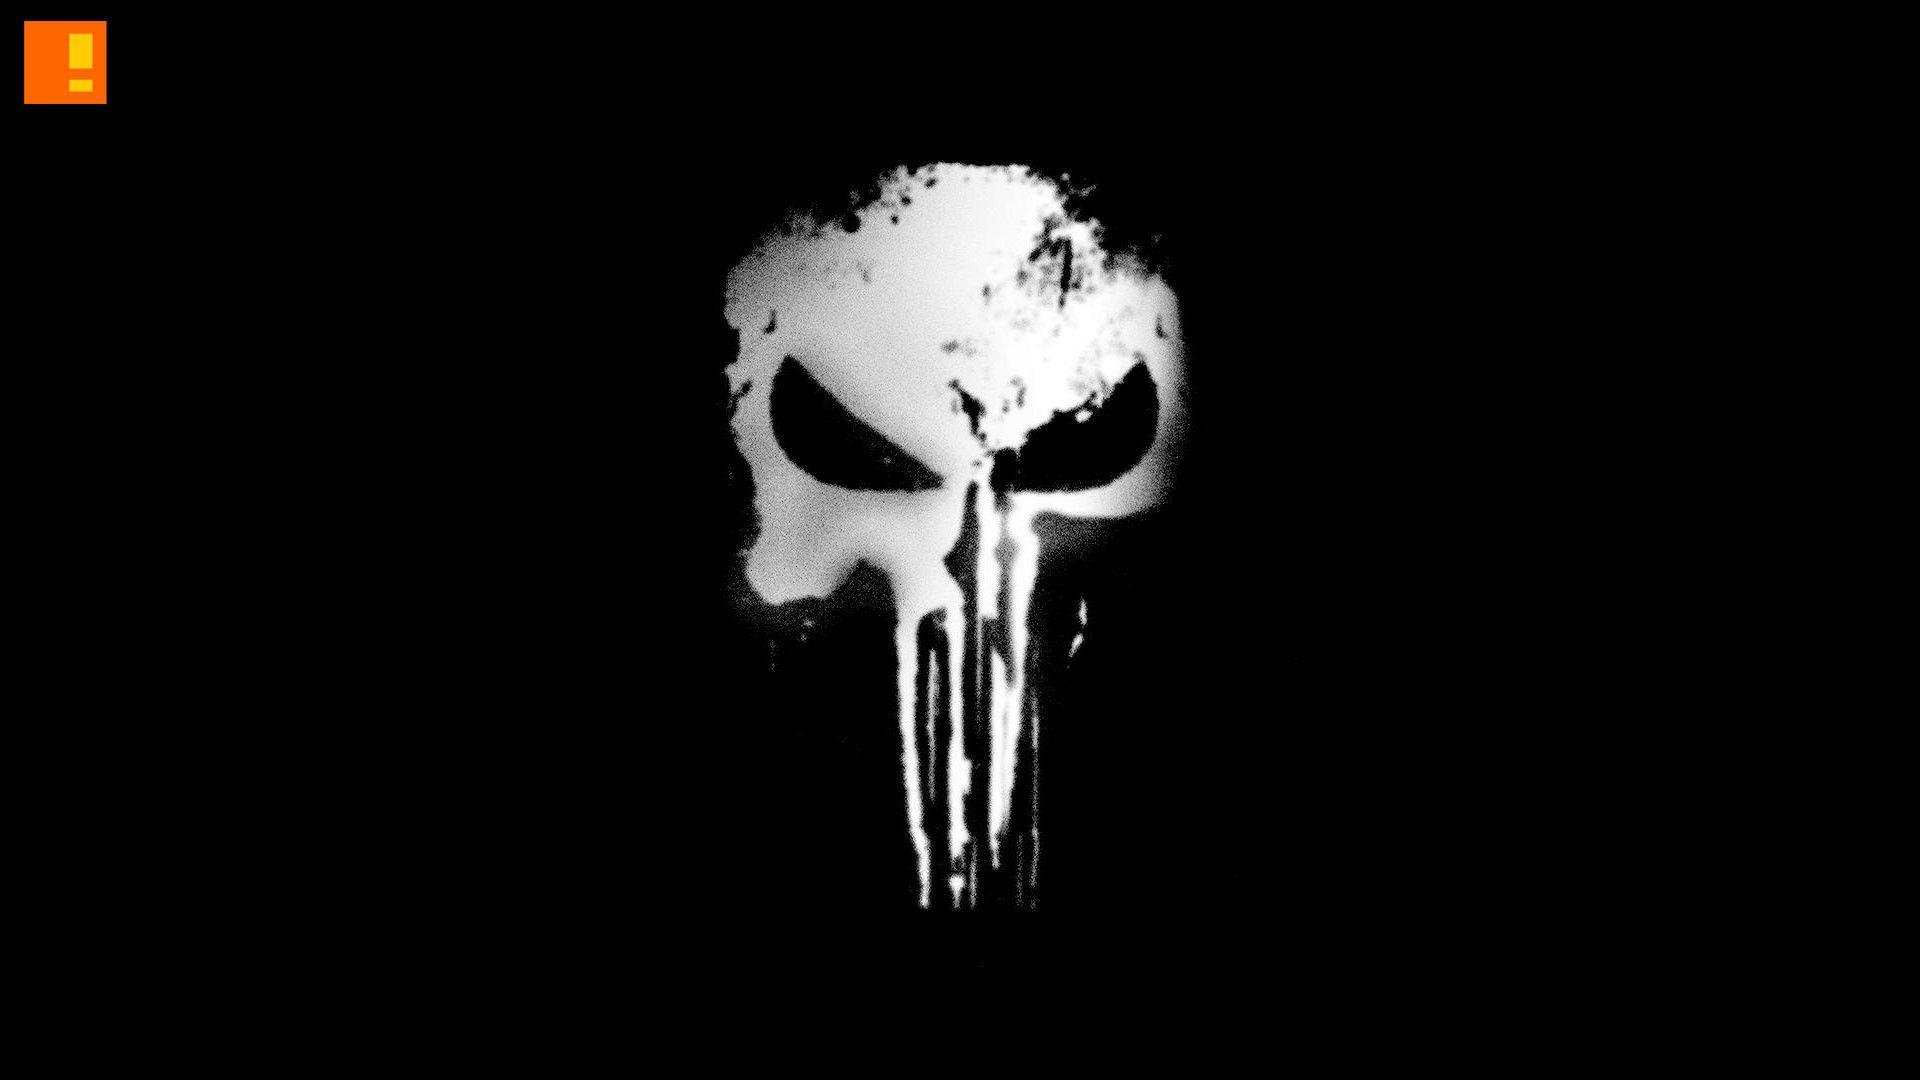 Wallpaper ID 53707  the punisher punisher logo tv shows hd free  download